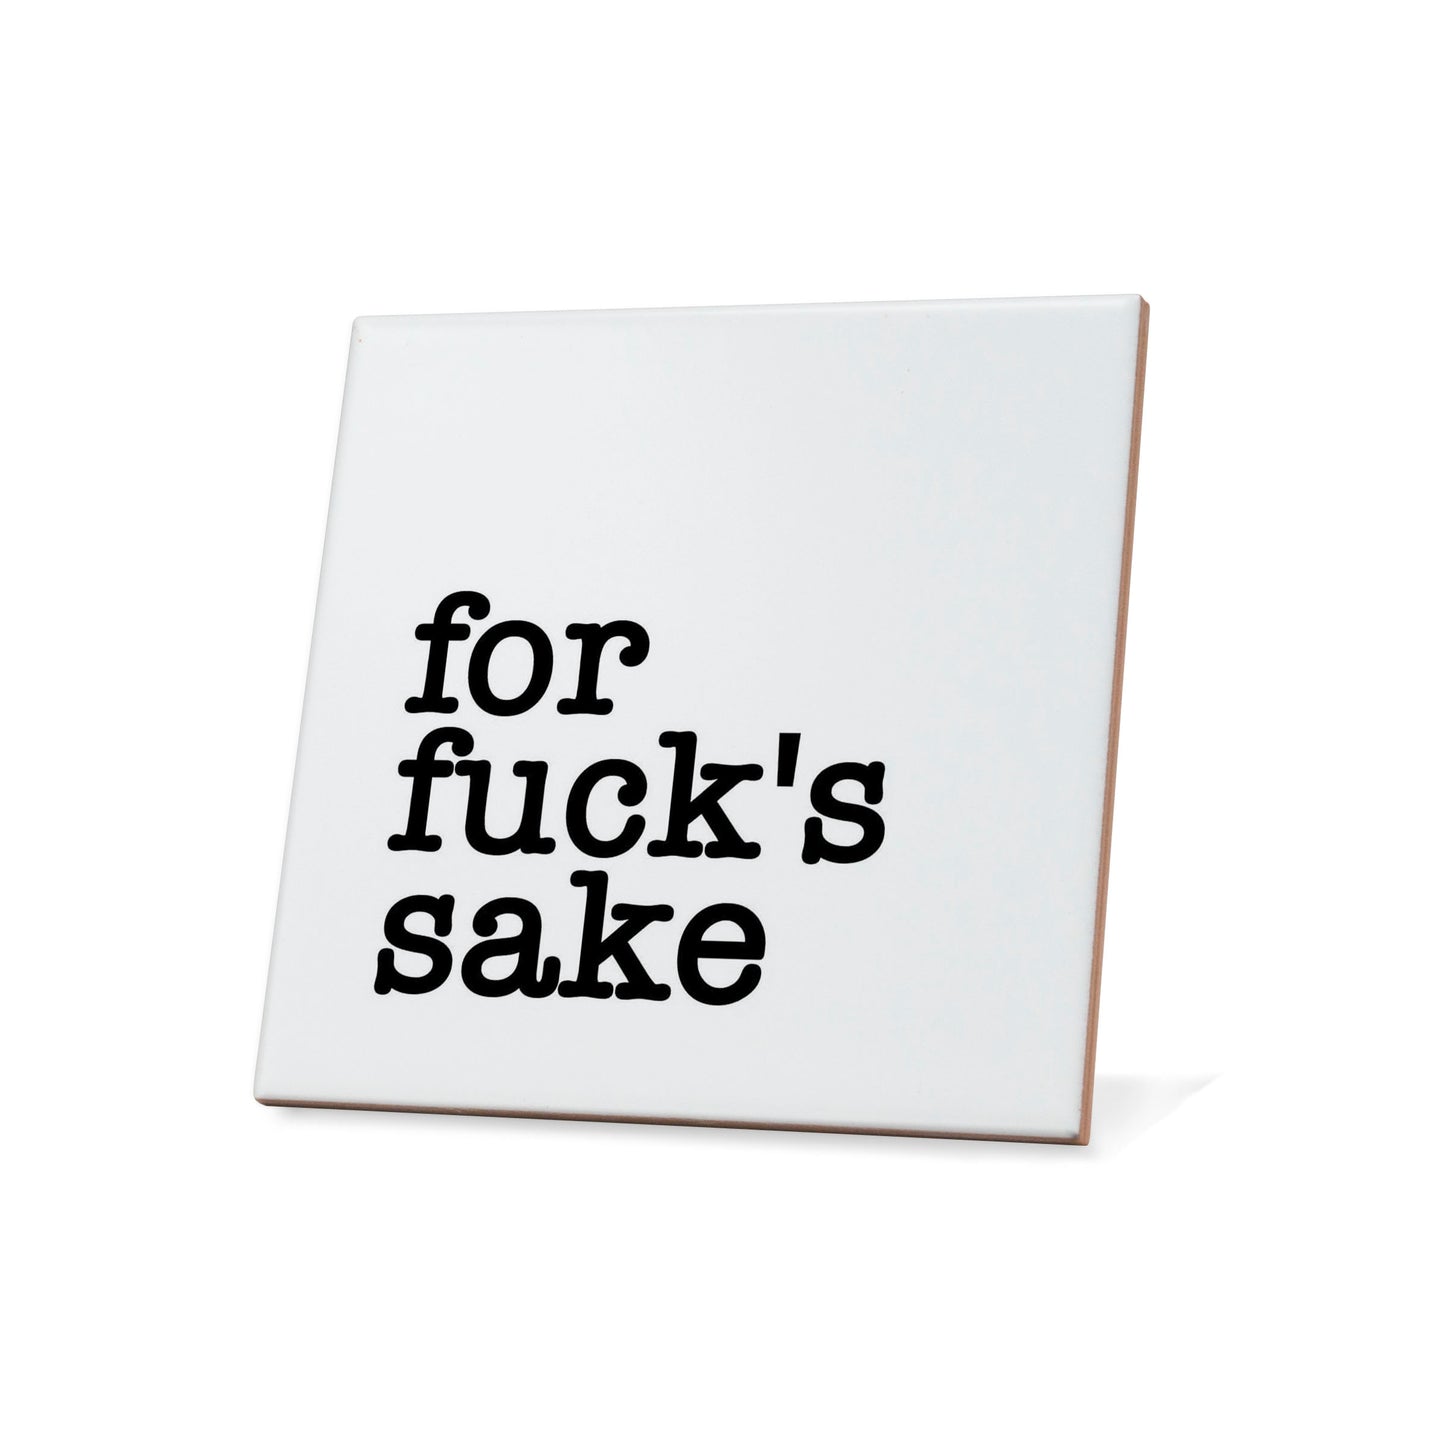 For fuck's sake Quote Coaster